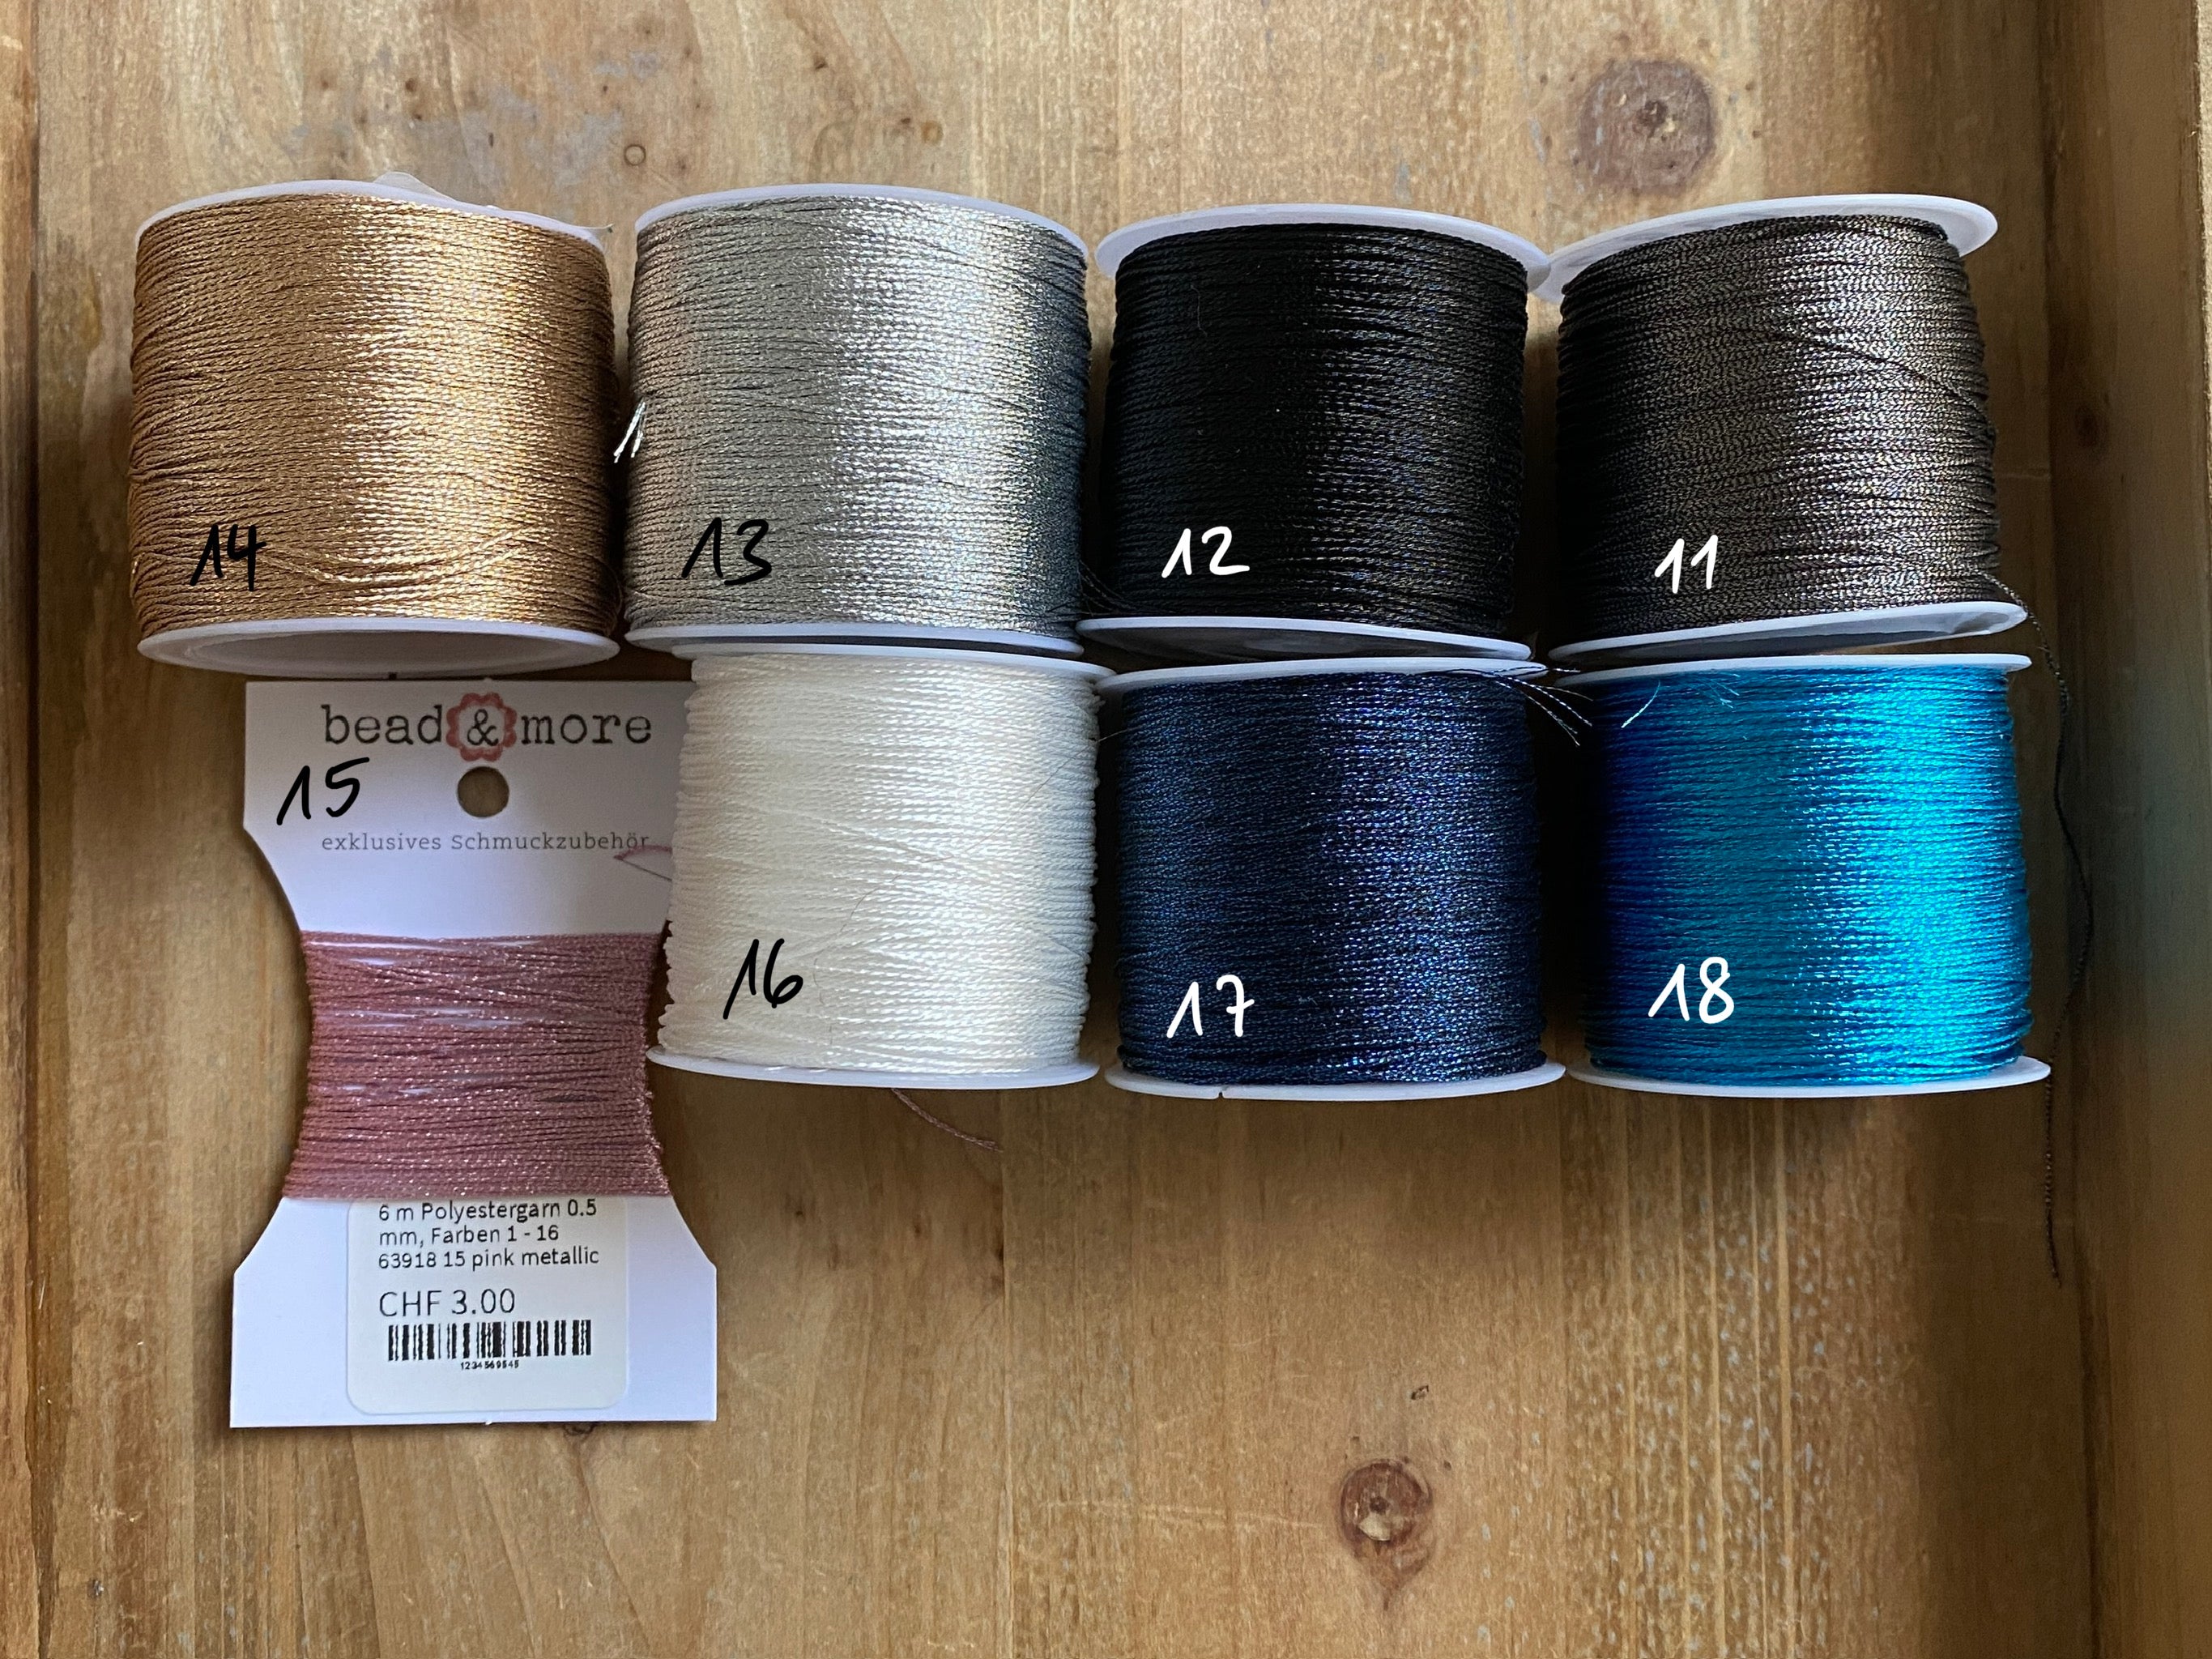 Fil polyester 0,5 mm, couleurs 11-17 